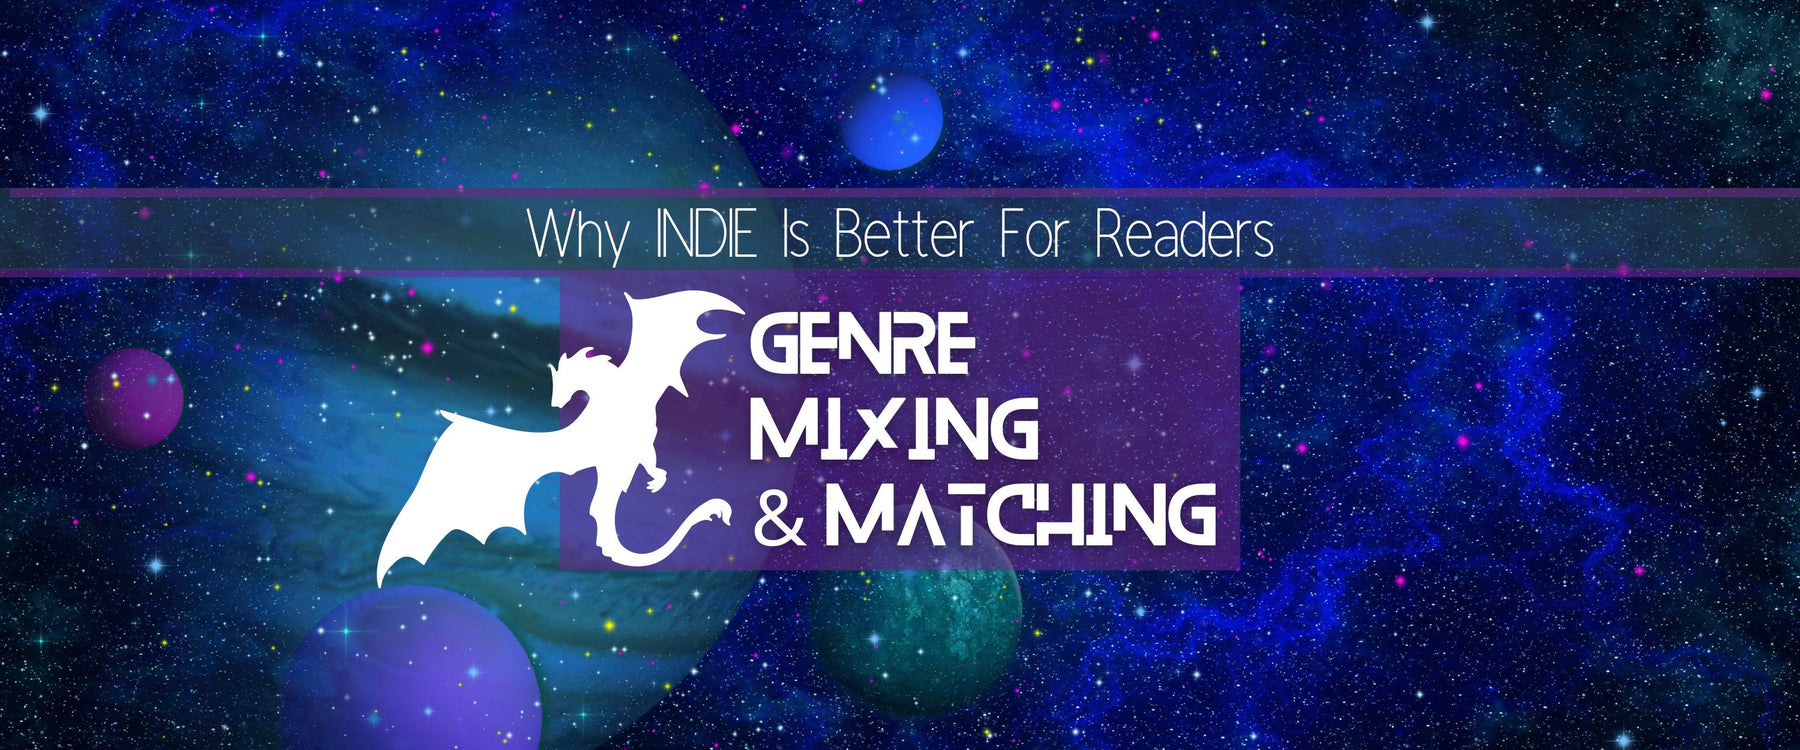 Genre Mixing and Matching | INDIE